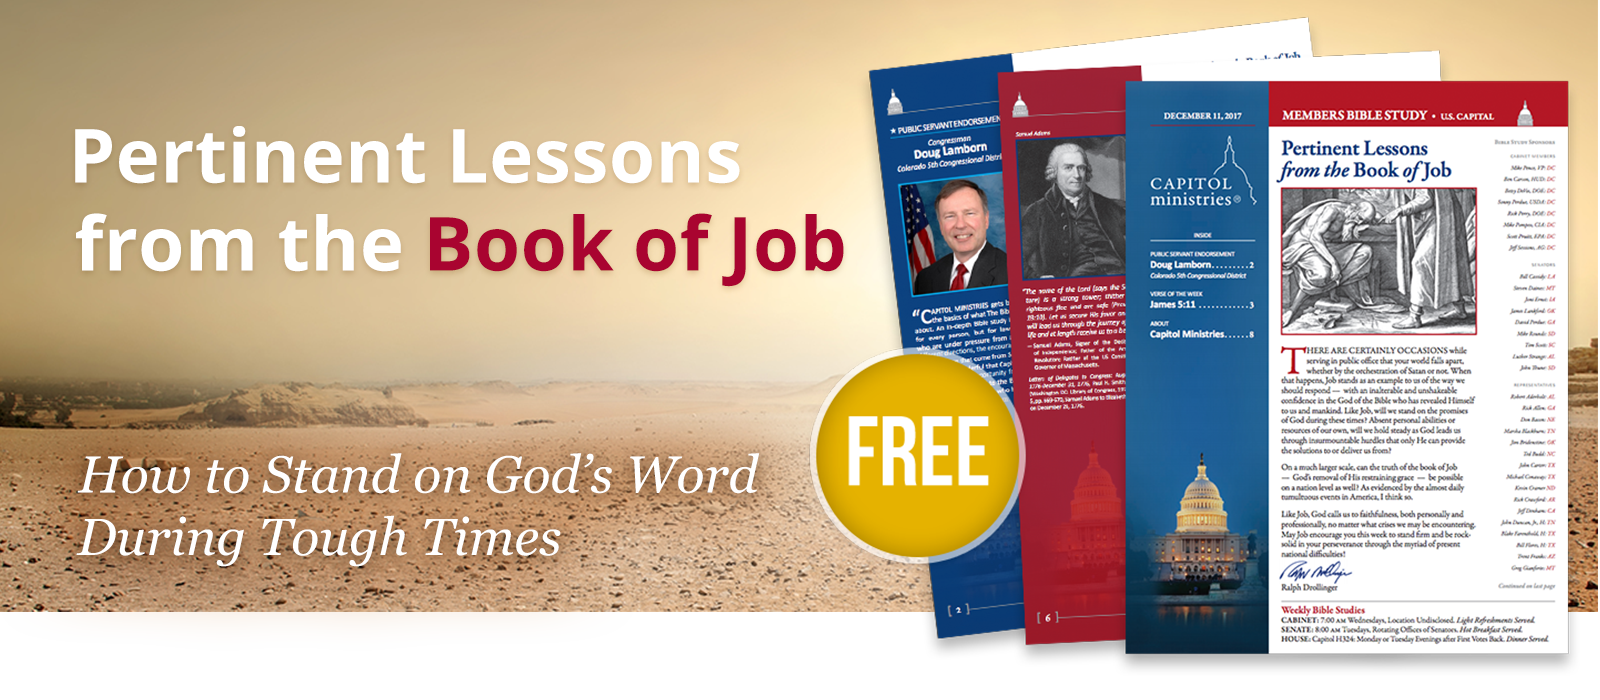 Pertinent Lessons from the Book of Job - How to Stand on God's Word During Tough Times